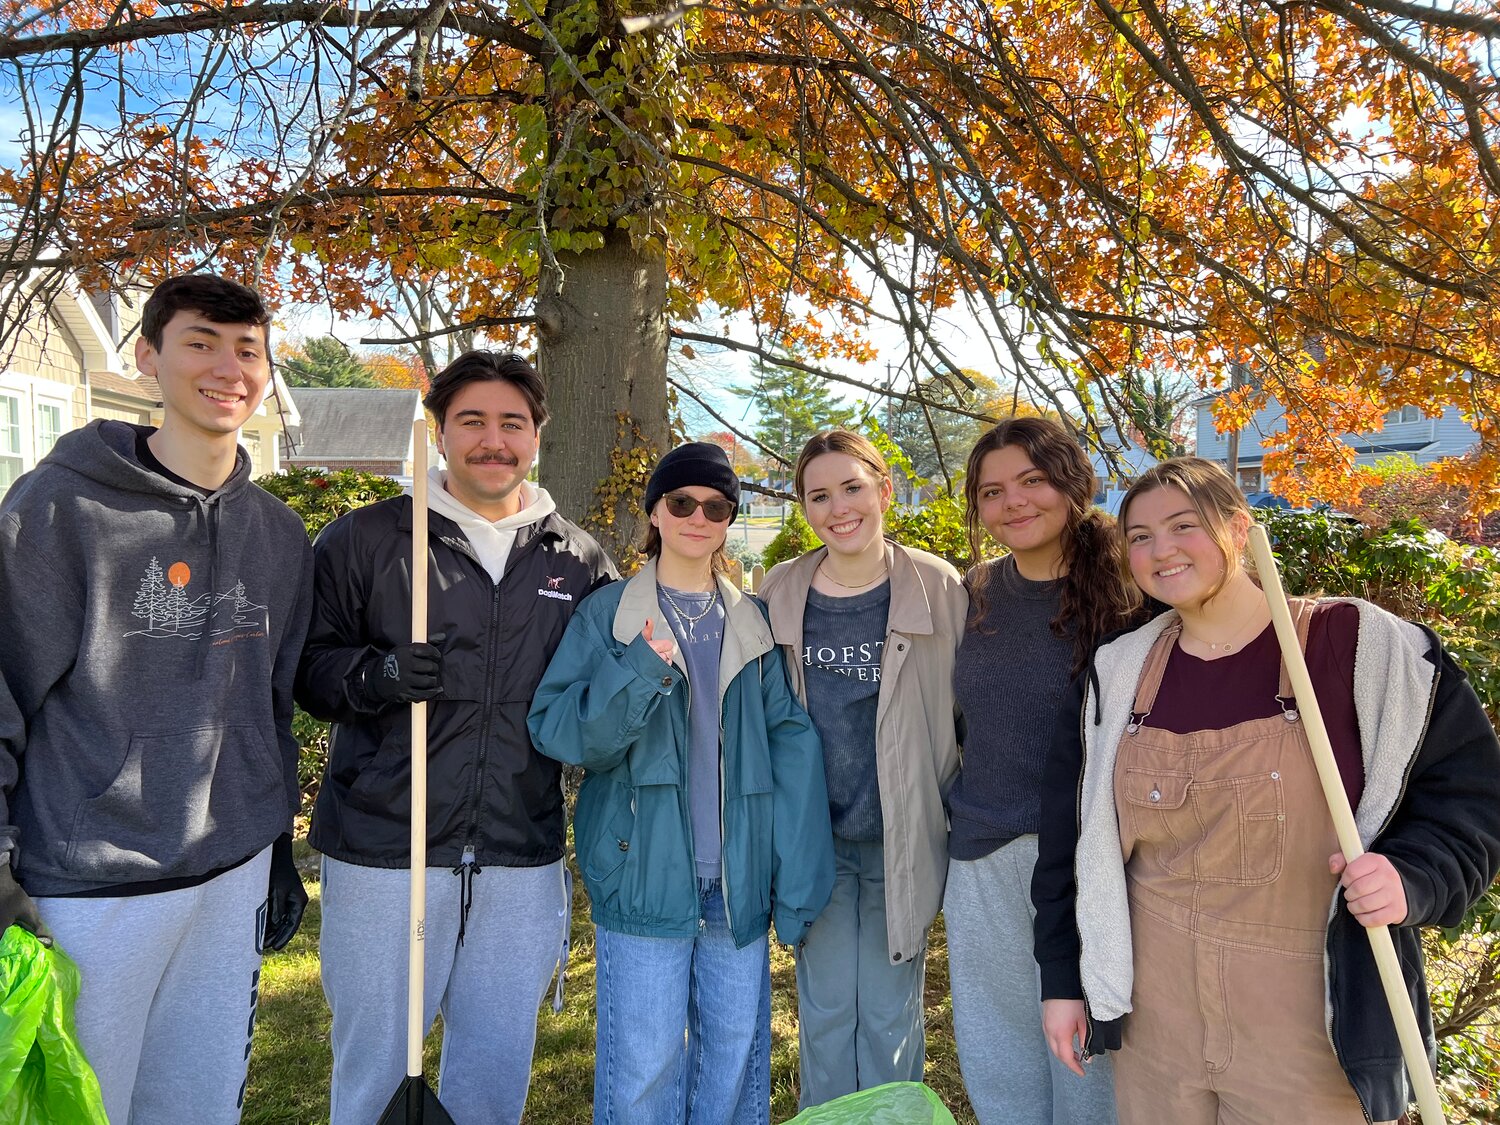 Six Hofstra 19-year-olds transformed the Rhodes lawn on Southern Parkway from a morass of leaves to a carpet of green. Music major Devan Saez, left, marketing major Ralph Barba, fine arts major Rosalie Mafoglio, biology majors Emma Ferland and Mirsela Redzematovic, and labor studies major Rylie Olsen all responded to an e-mail inviting their participation in Saturday’s Shake-A-Rake event.